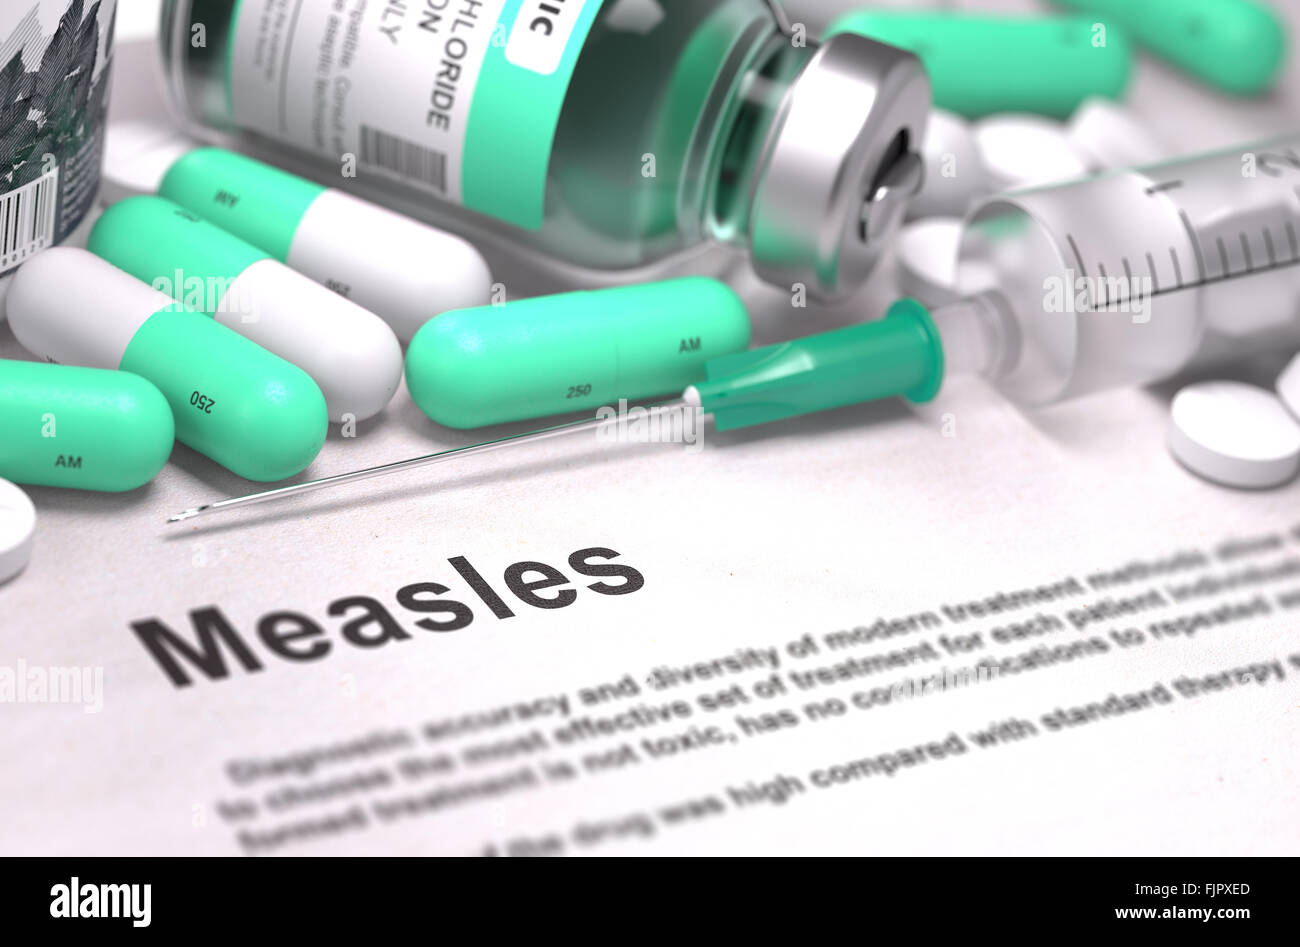 Diagnosis - Measles. Medical Concept with Blurred Background. Stock Photo